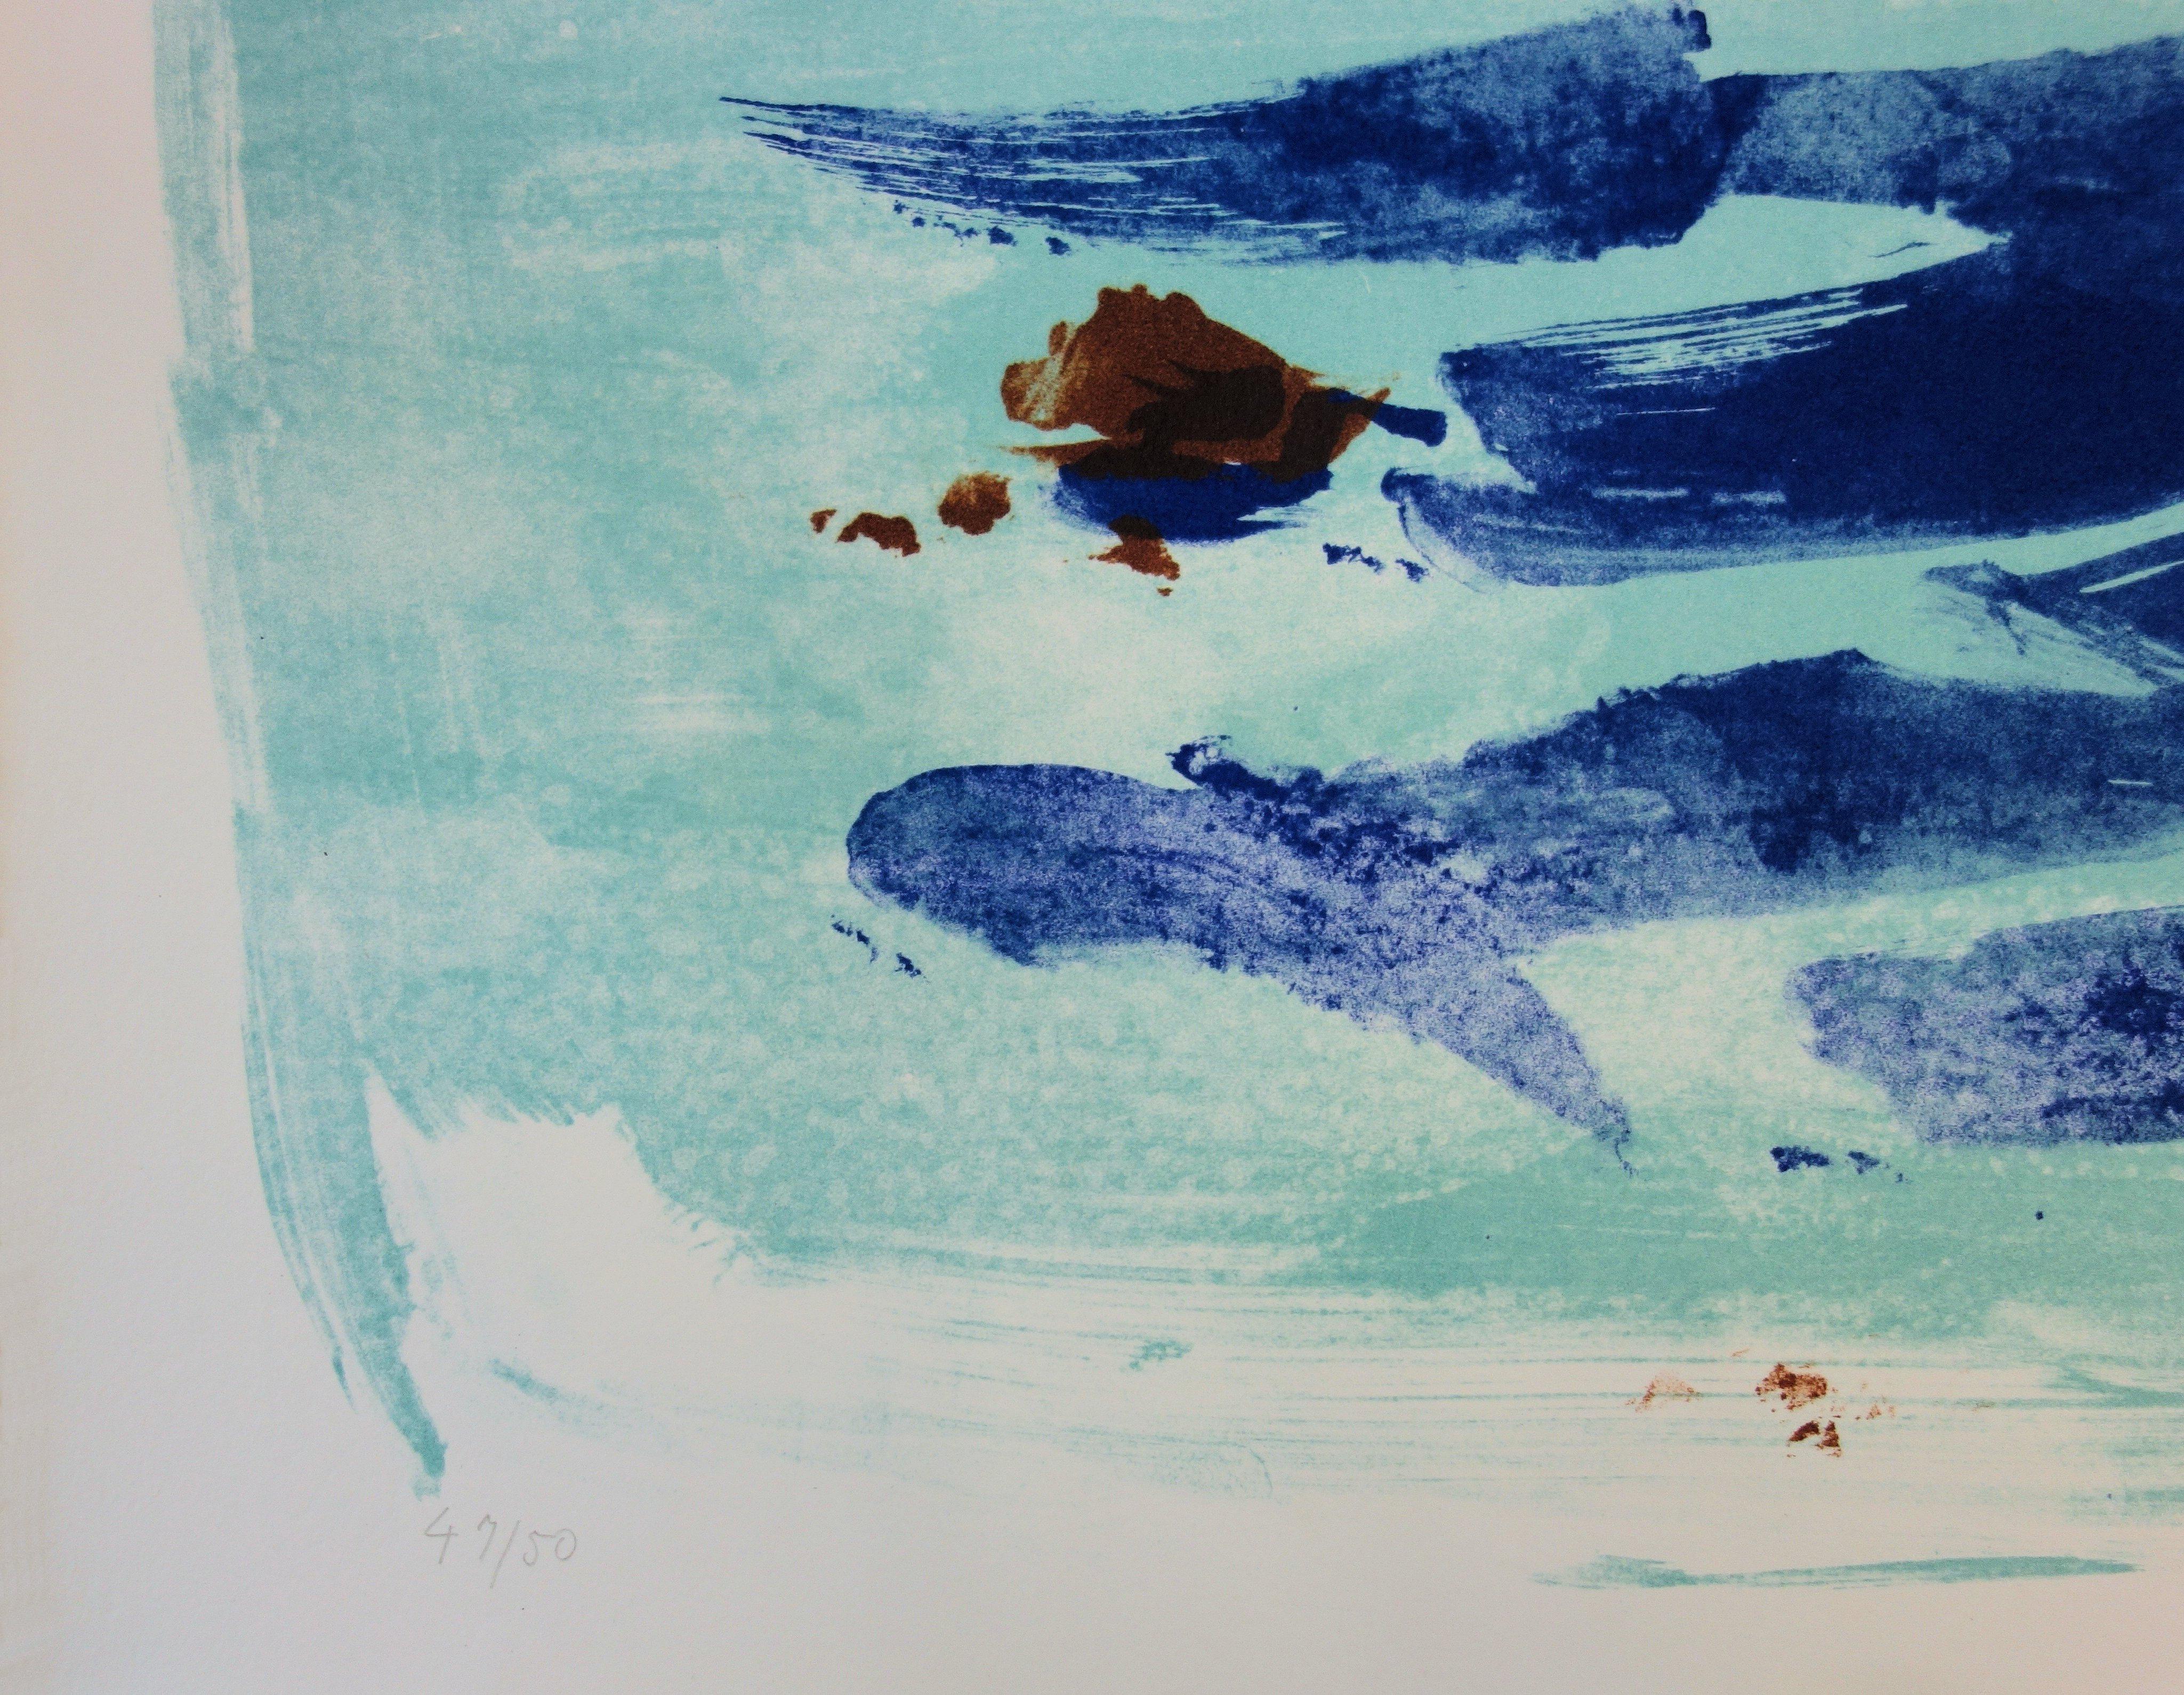 Light on the Sea - Original handsigned lithograph - 50 copies - Blue Landscape Print by Jean Helion